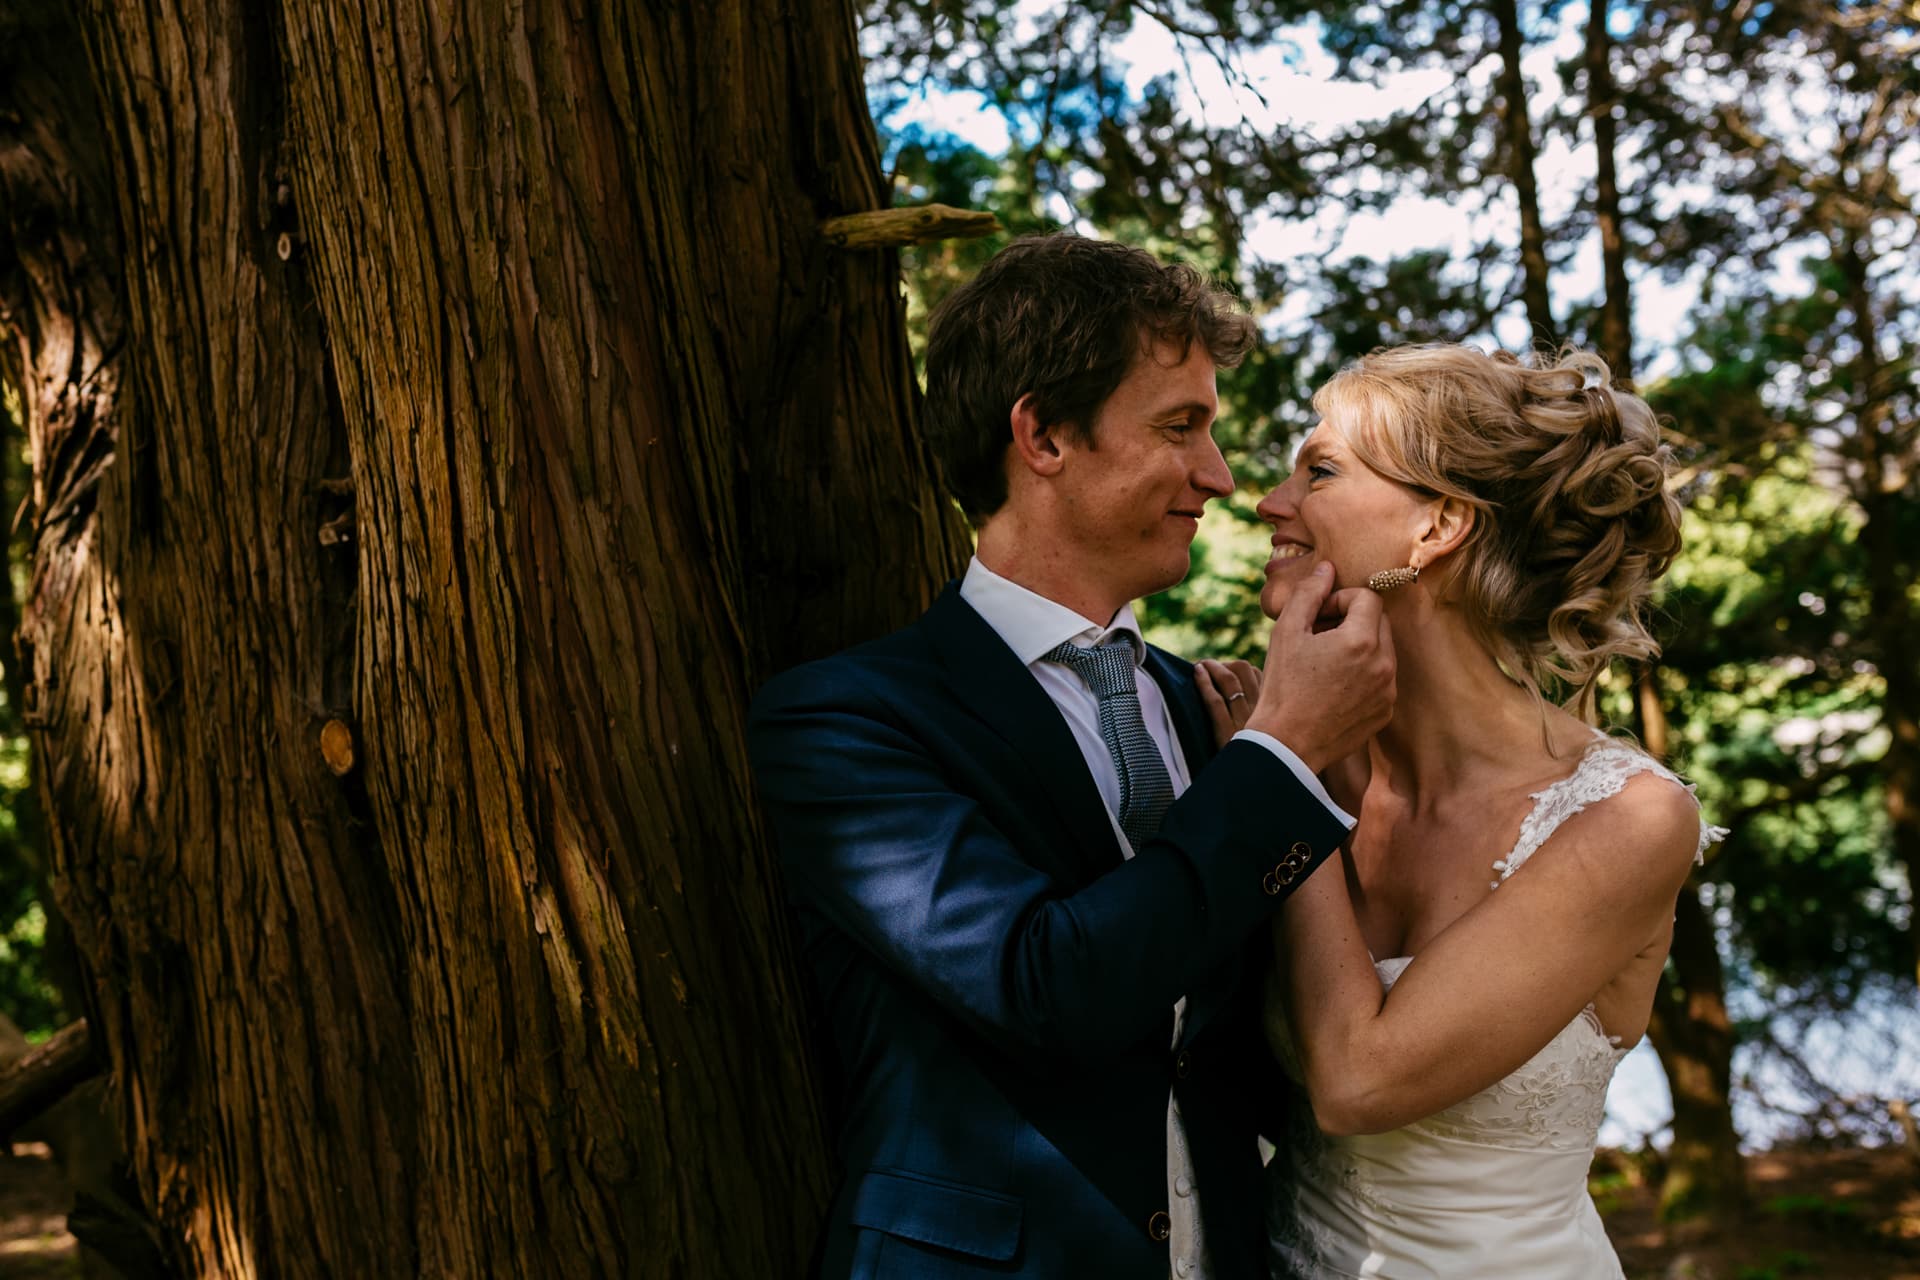 Getting married in the woods - A bride and groom hug in front of a tree.